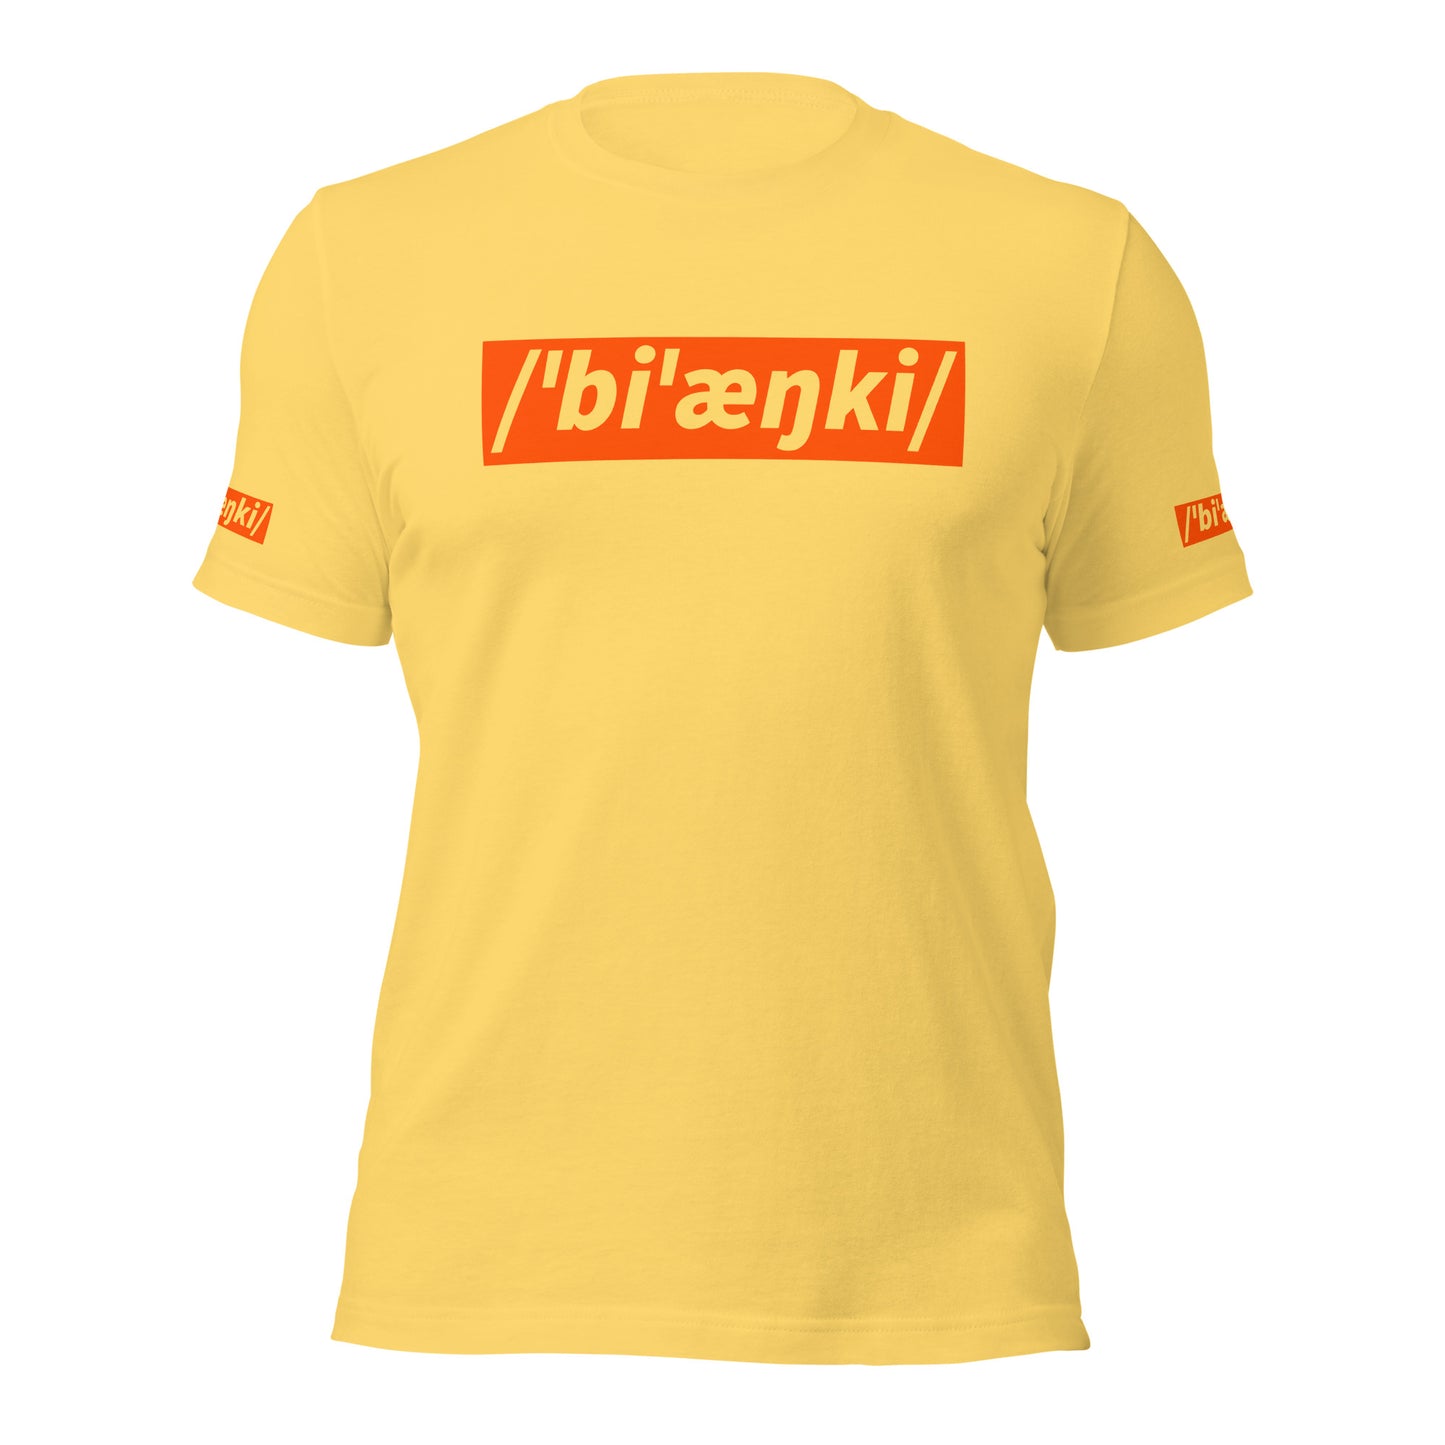 Bianchi Bicycle T-Shirt, Adult, Phonetic Spelling AT004